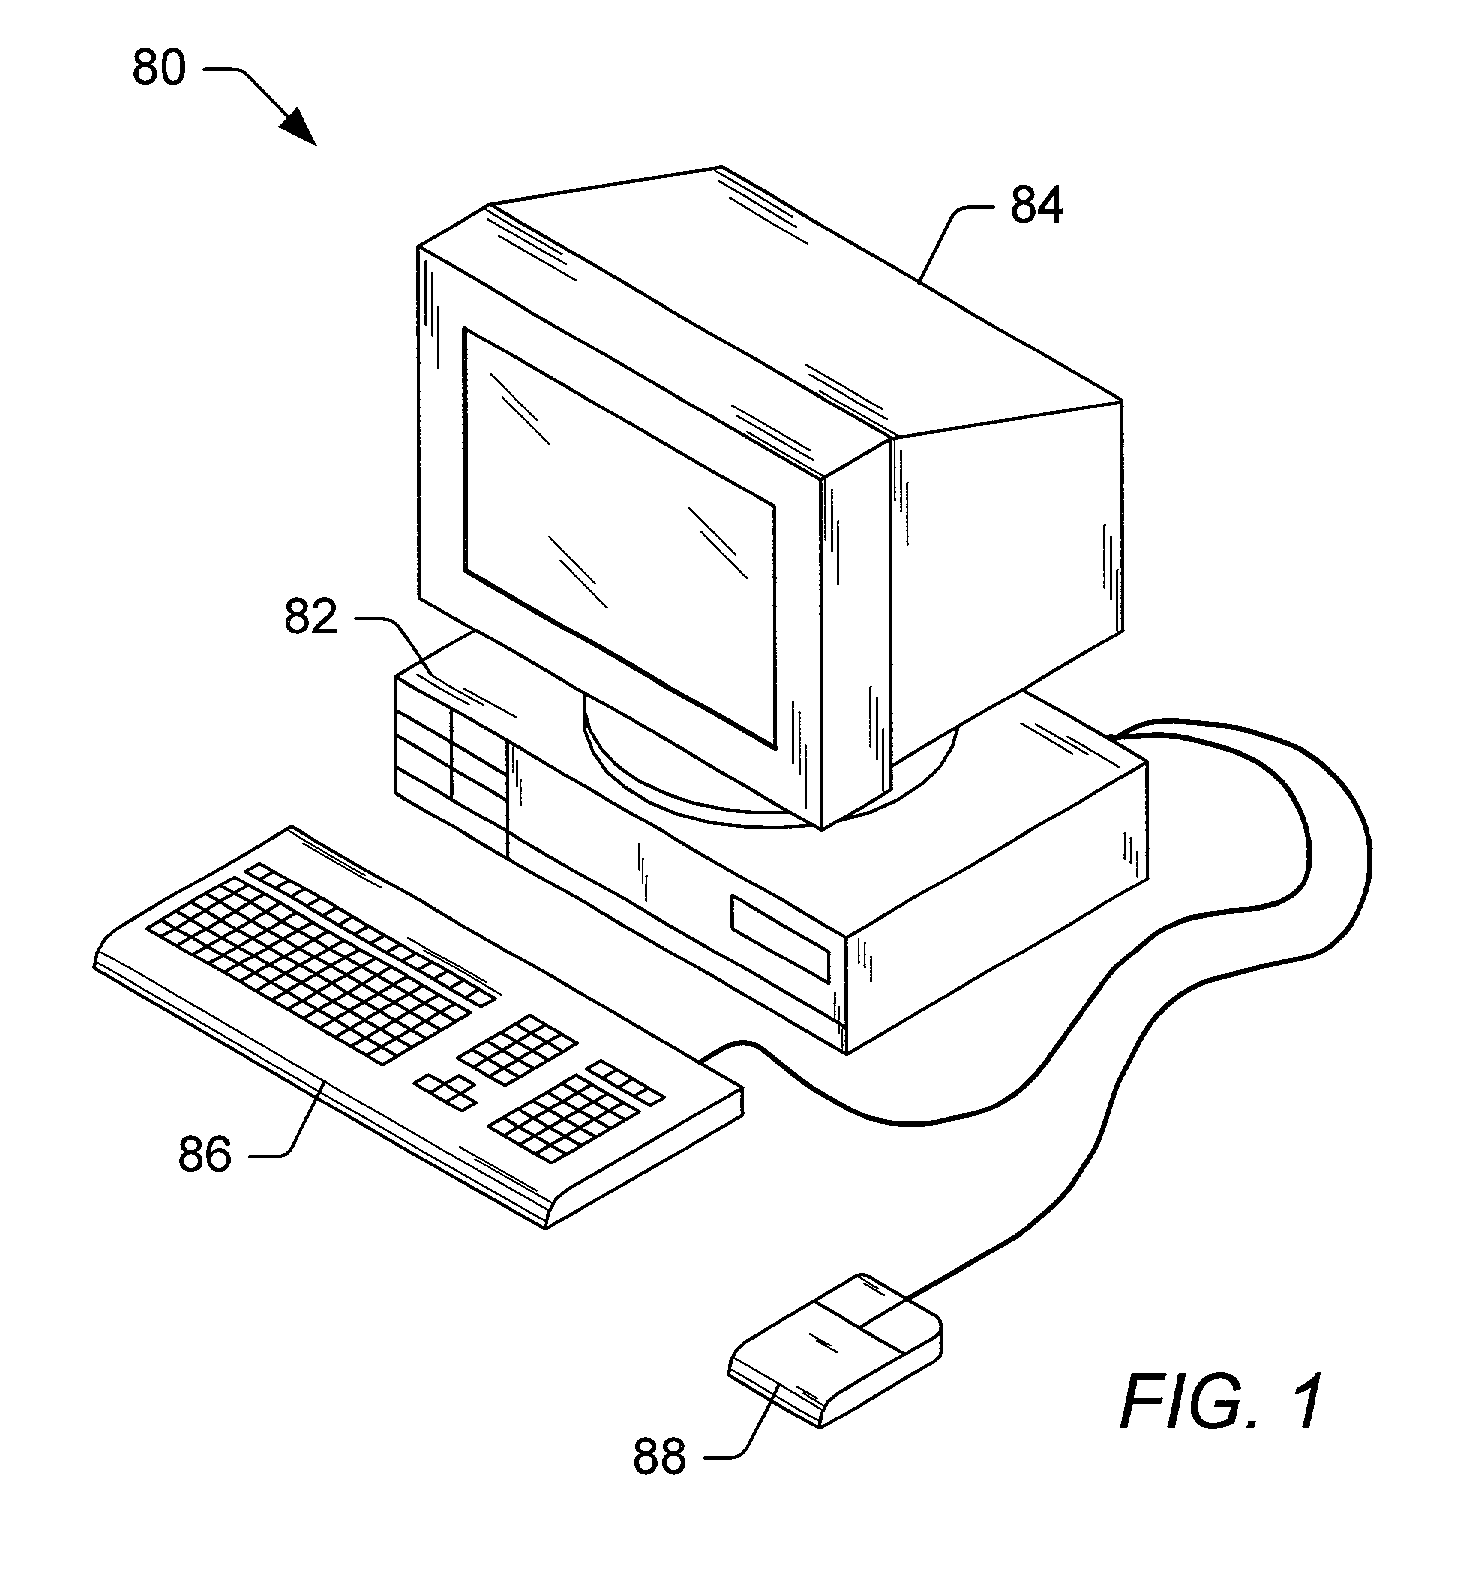 Multipurpose memory system for use in a graphics system